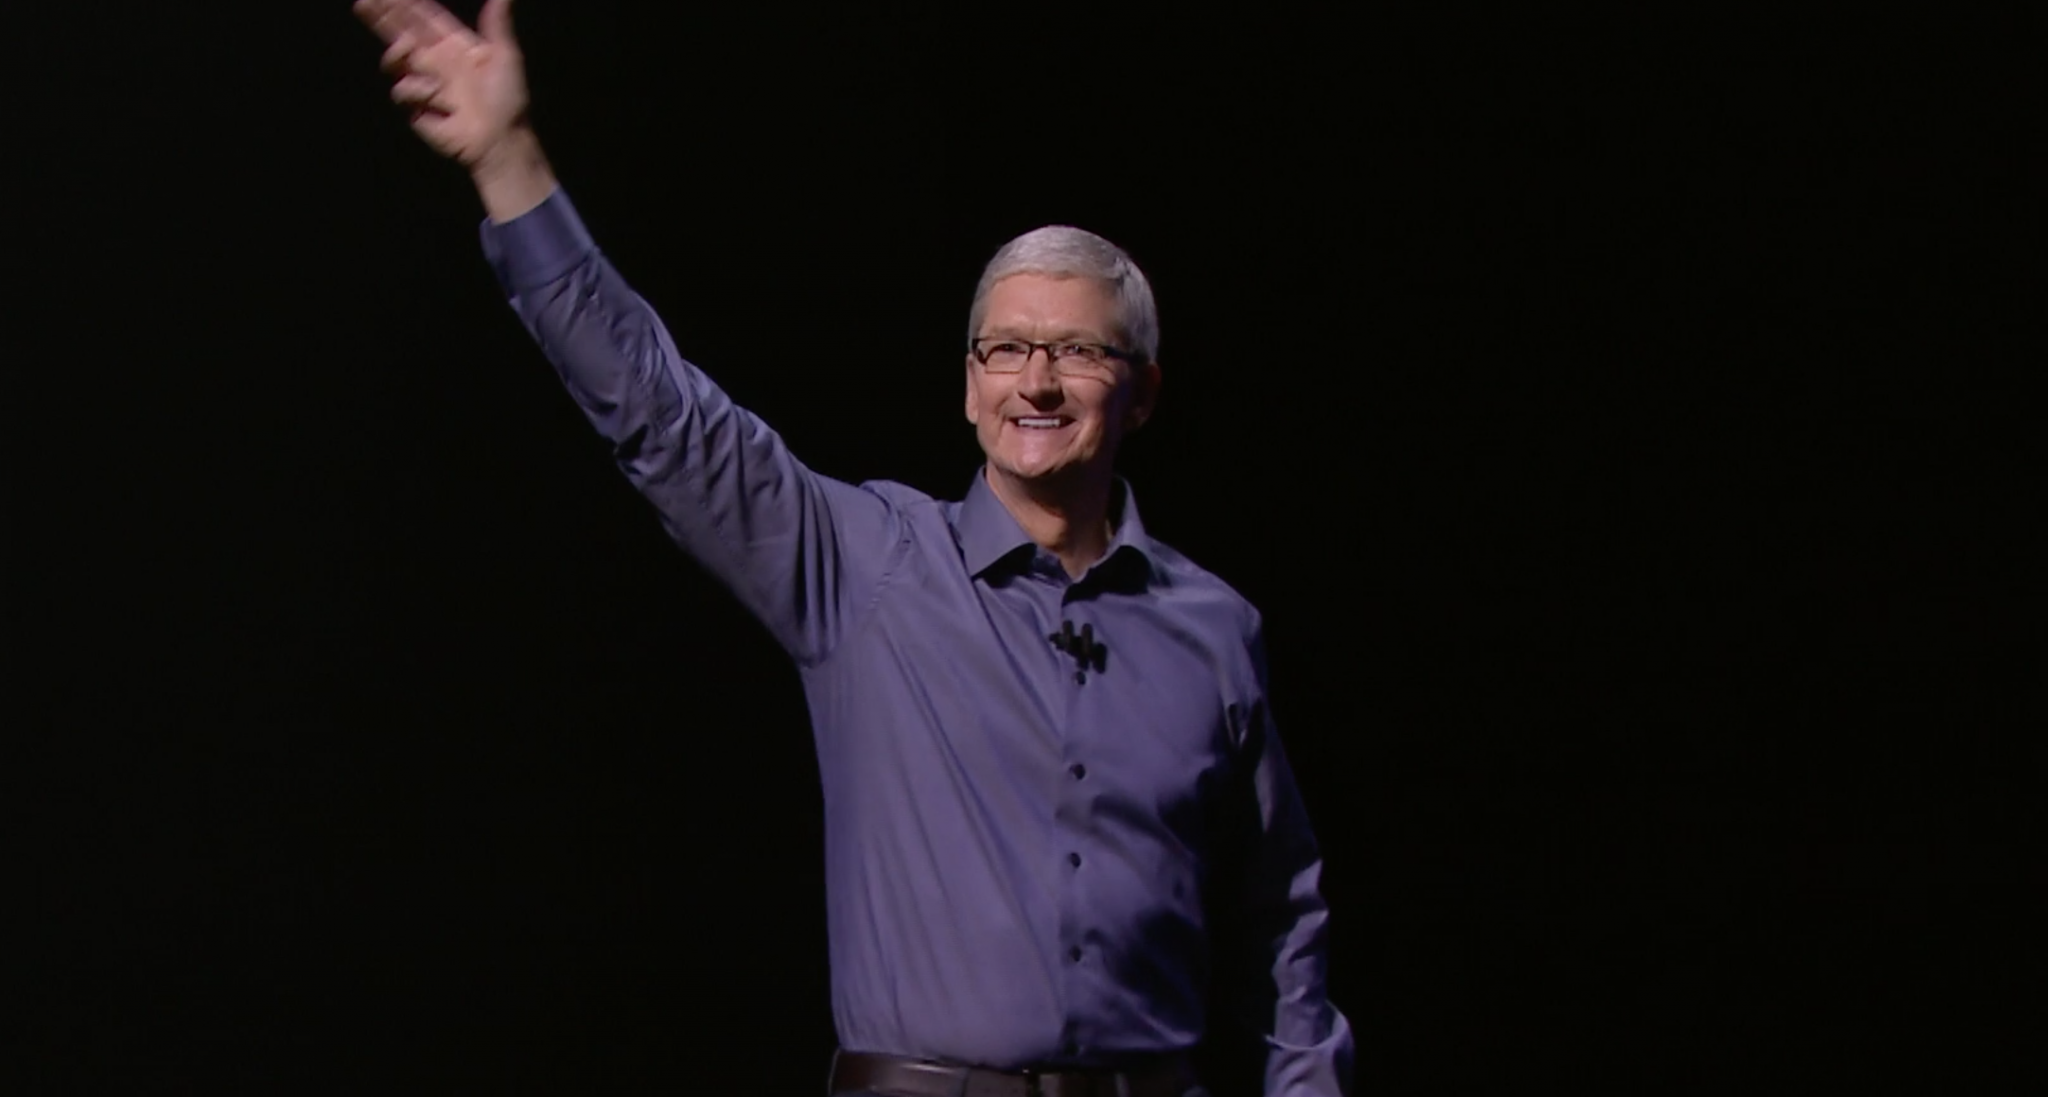 Apple Shines Up Its Lineup With New iPhones, iPads and More